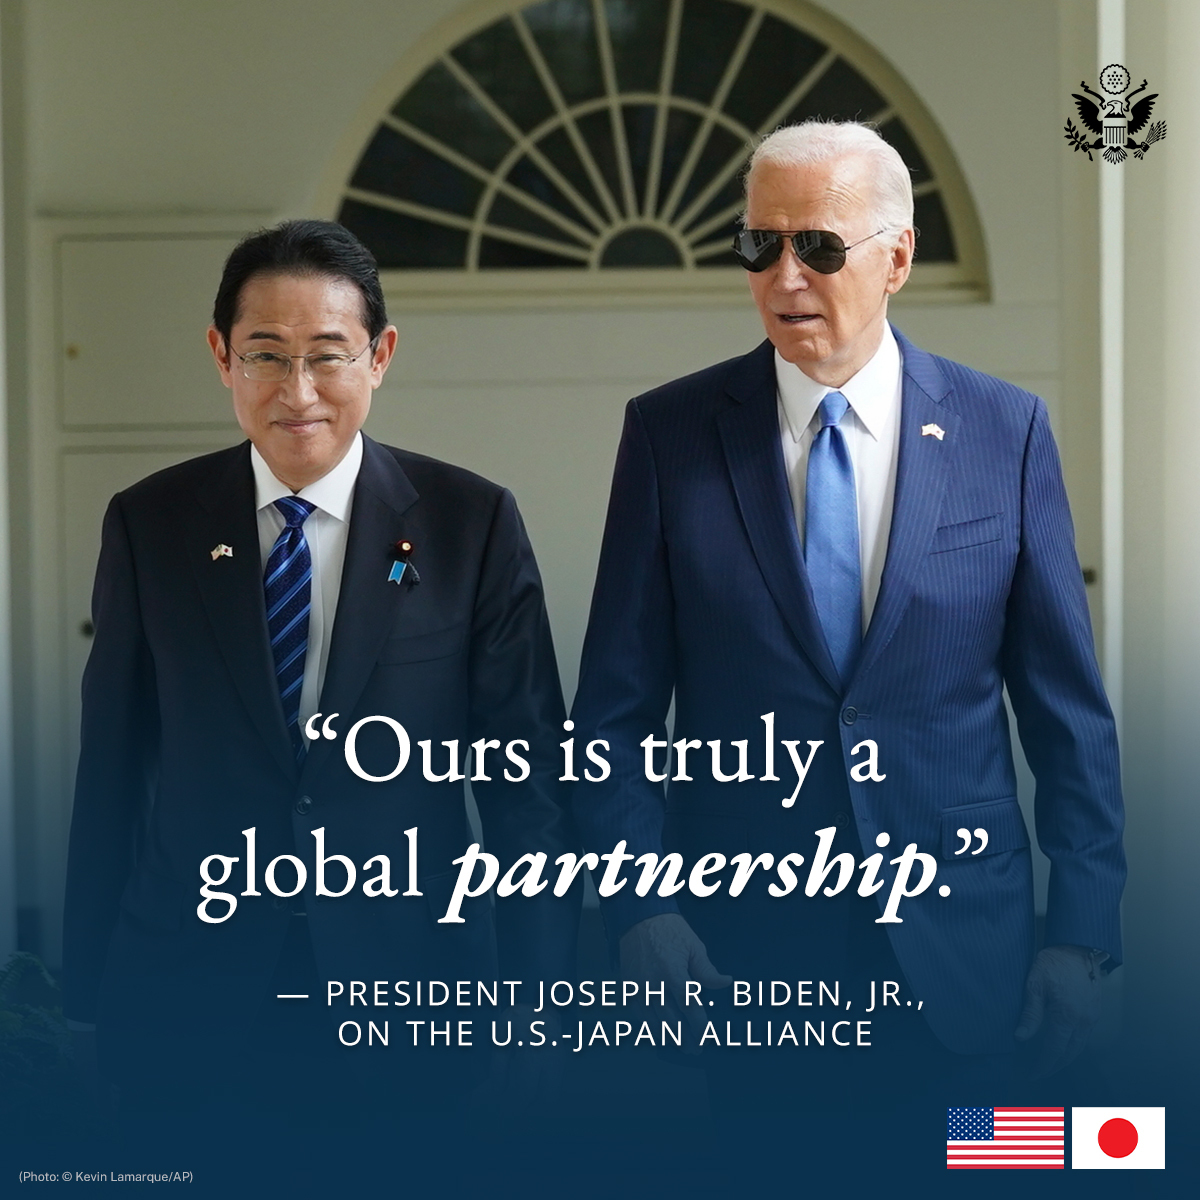 The alliance between Japan and the United States is a cornerstone of peace, security, prosperity in the Indo-Pacific and around the world. - @POTUS